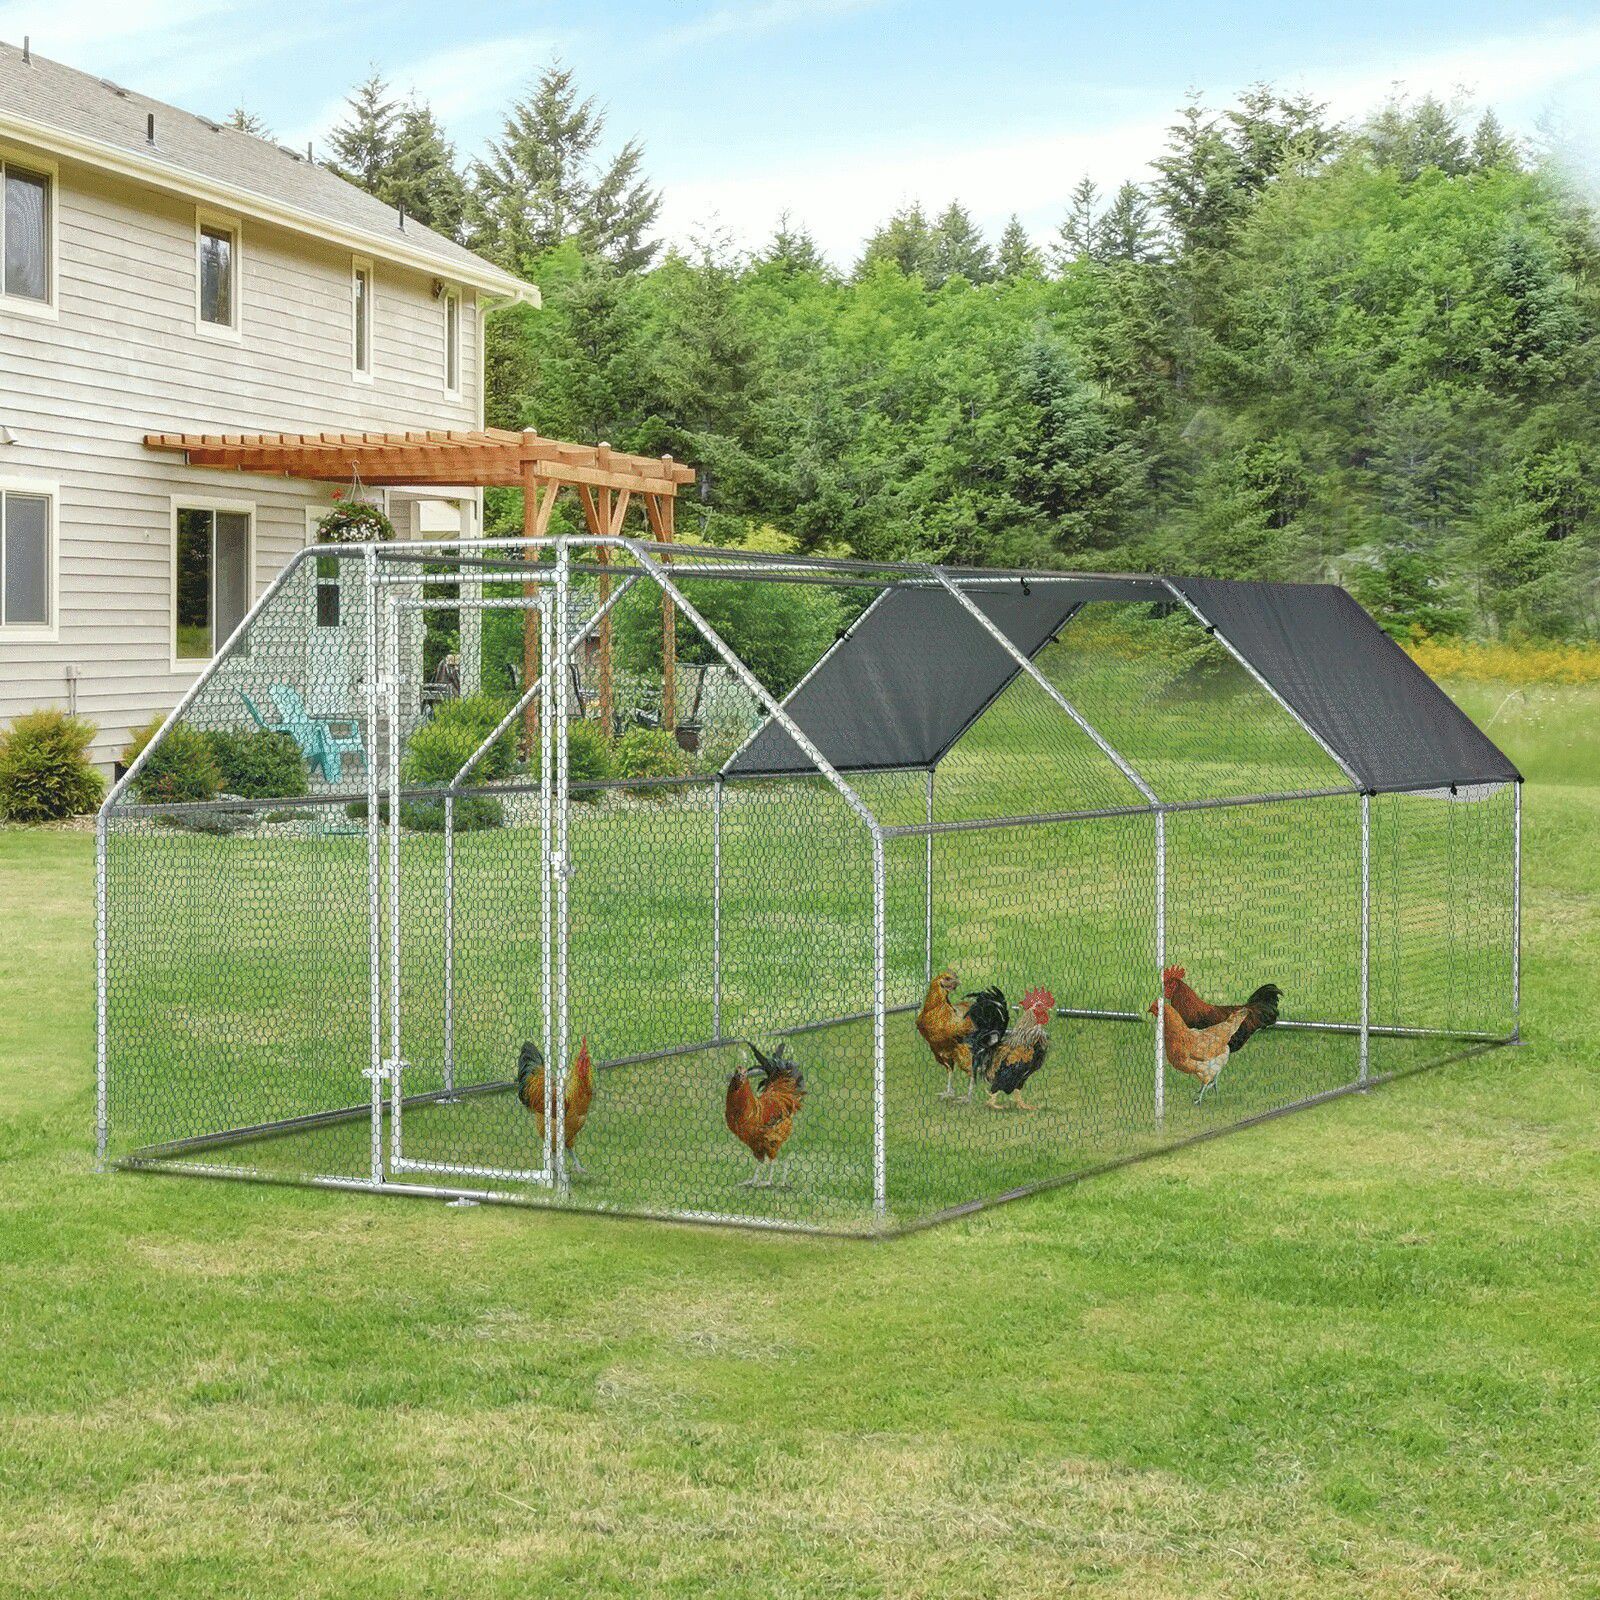 Galvanized Metal Chicken Coop Càge with Cover